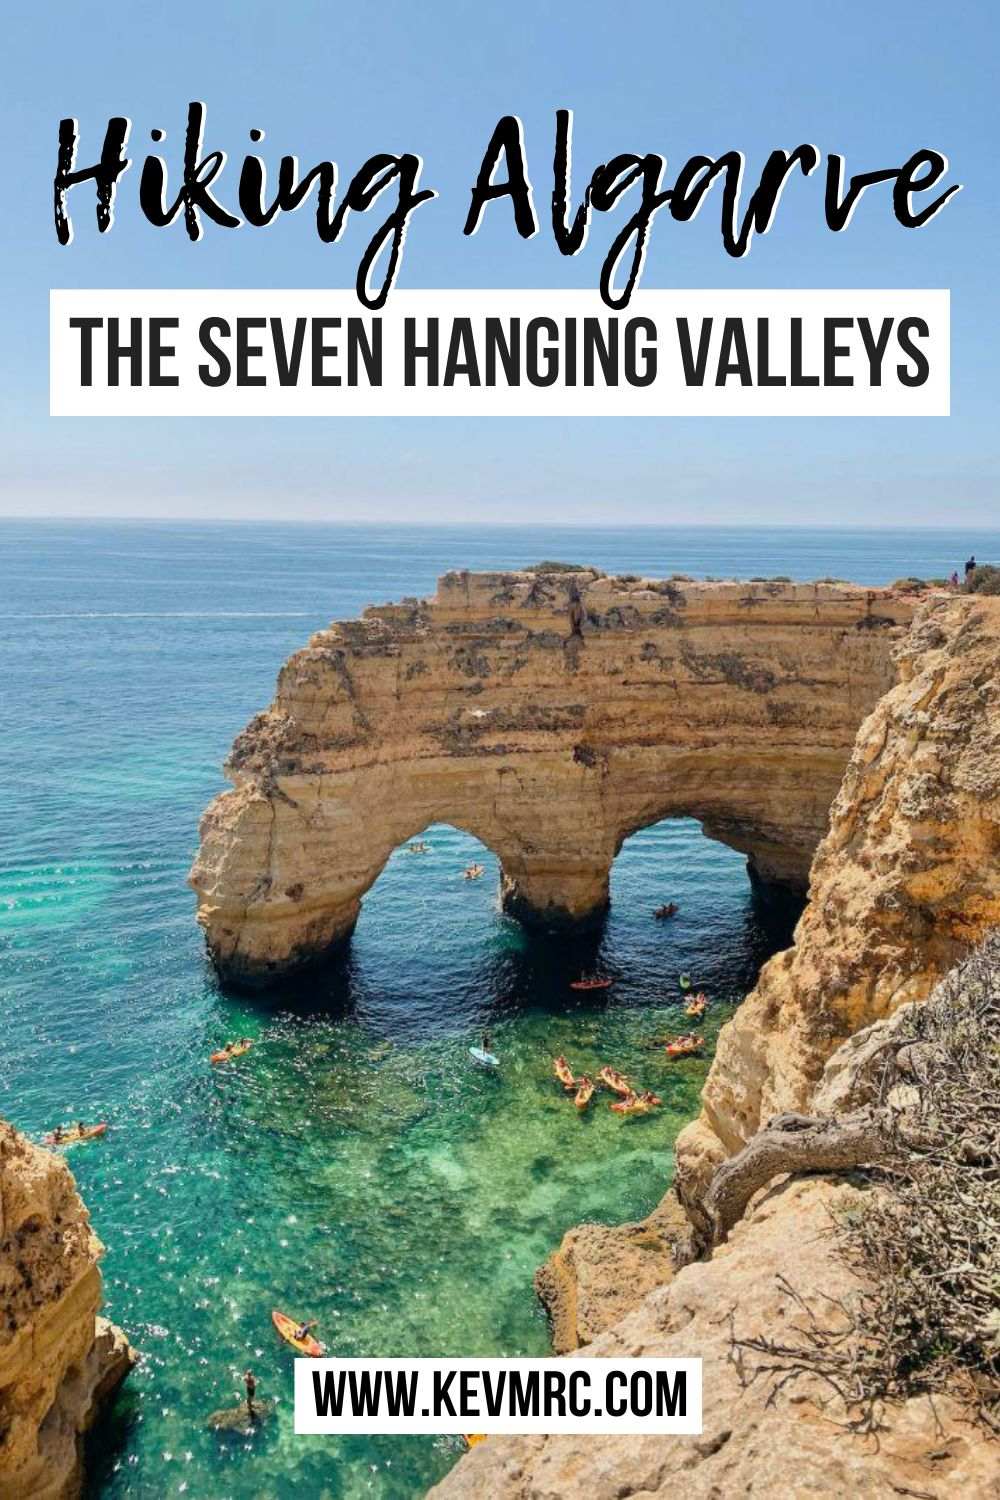 Wondering how to hike the Seven Hanging Valleys Trail? In this guide, get all the info and tips you need for a successful hike in the Algarve, Portugal. Free map is included! seven hanging valleys trail algarve | seven hanging valleys trail map | seven hanging valleys trail hike | 7 hanging valleys | hiking algarve portugal | algarve hike